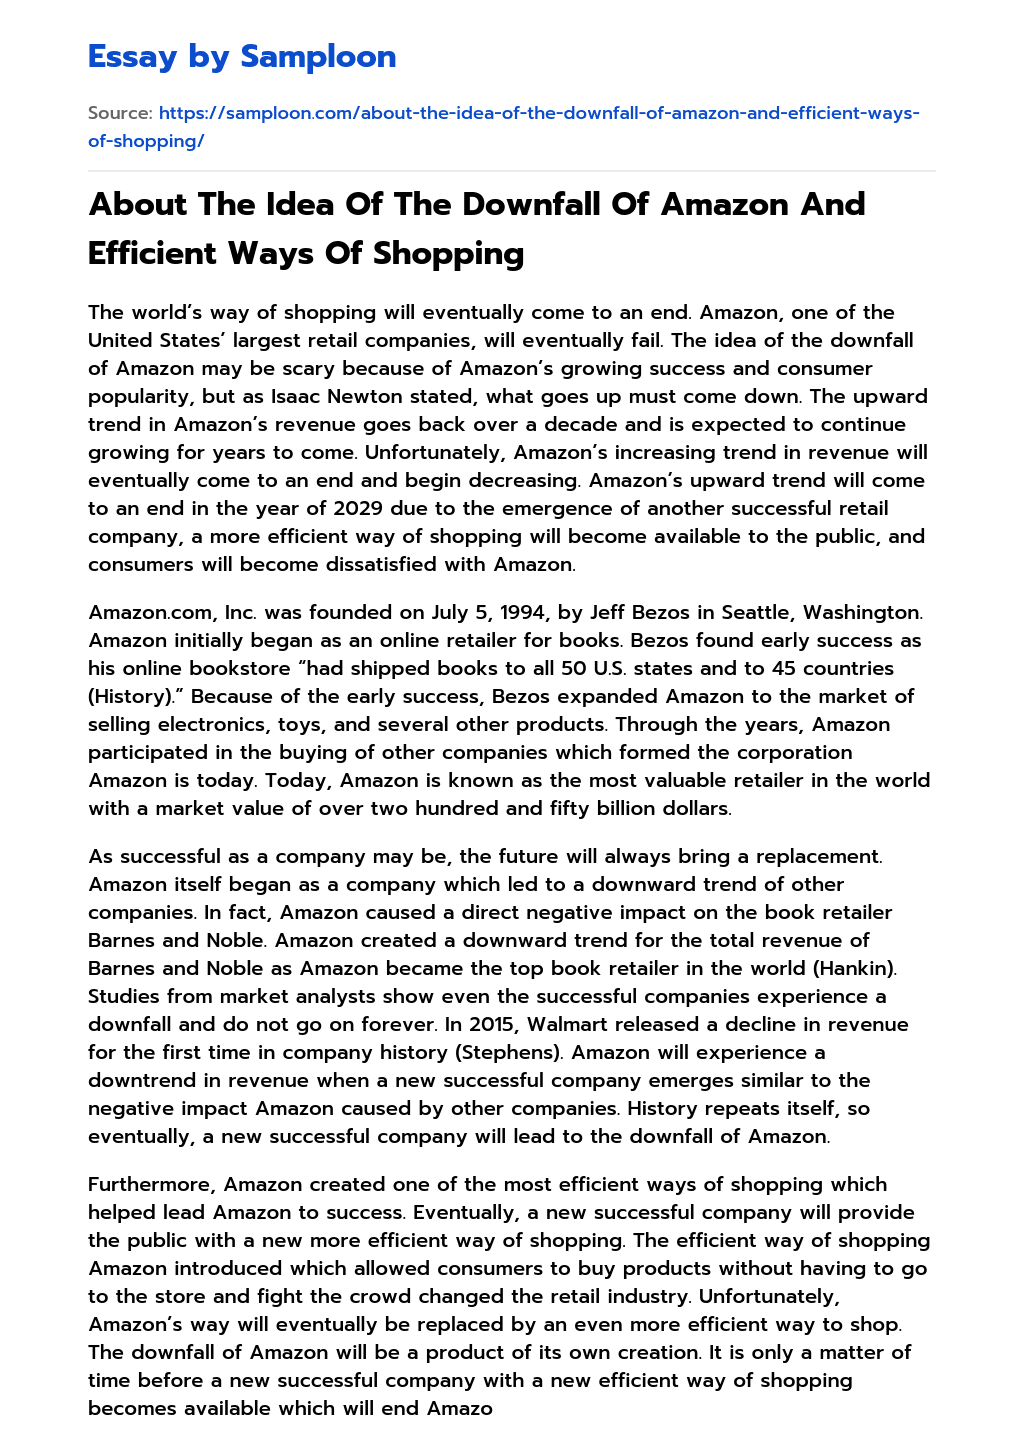 About The Idea Of The Downfall Of Amazon And Efficient Ways Of Shopping essay